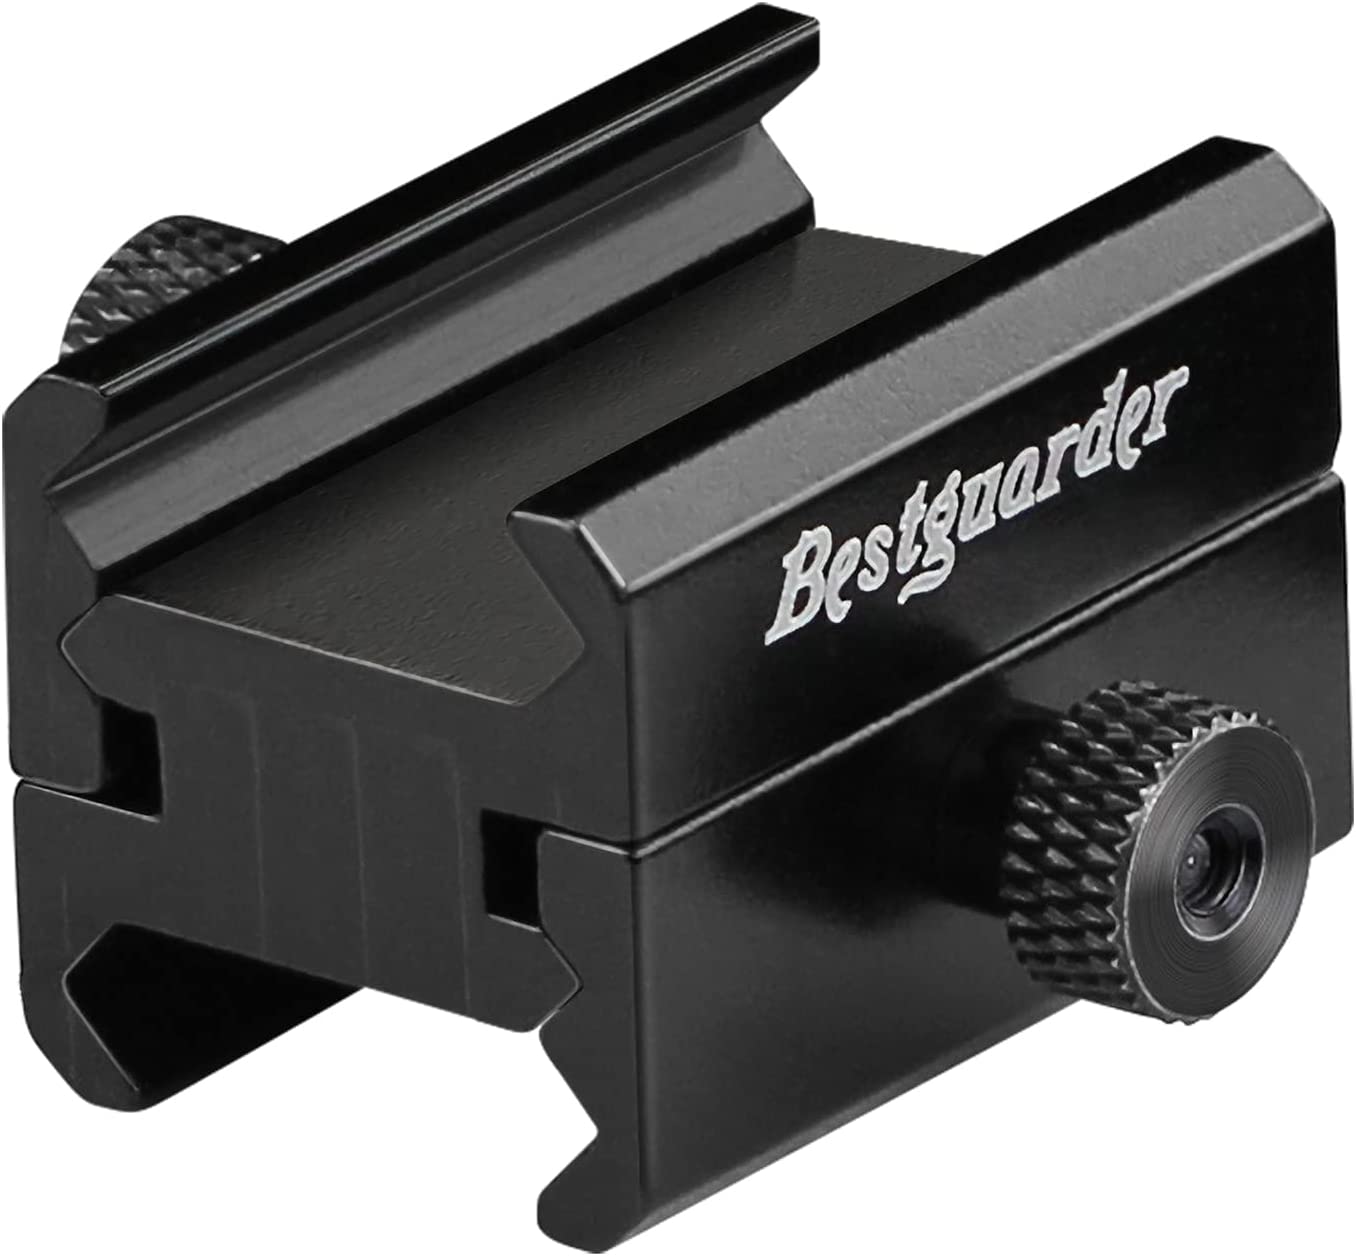  ohhunt Picatinny Mount for Red Dot Sight, Ruggedized Miniature  for RMR and SRO : Sports & Outdoors